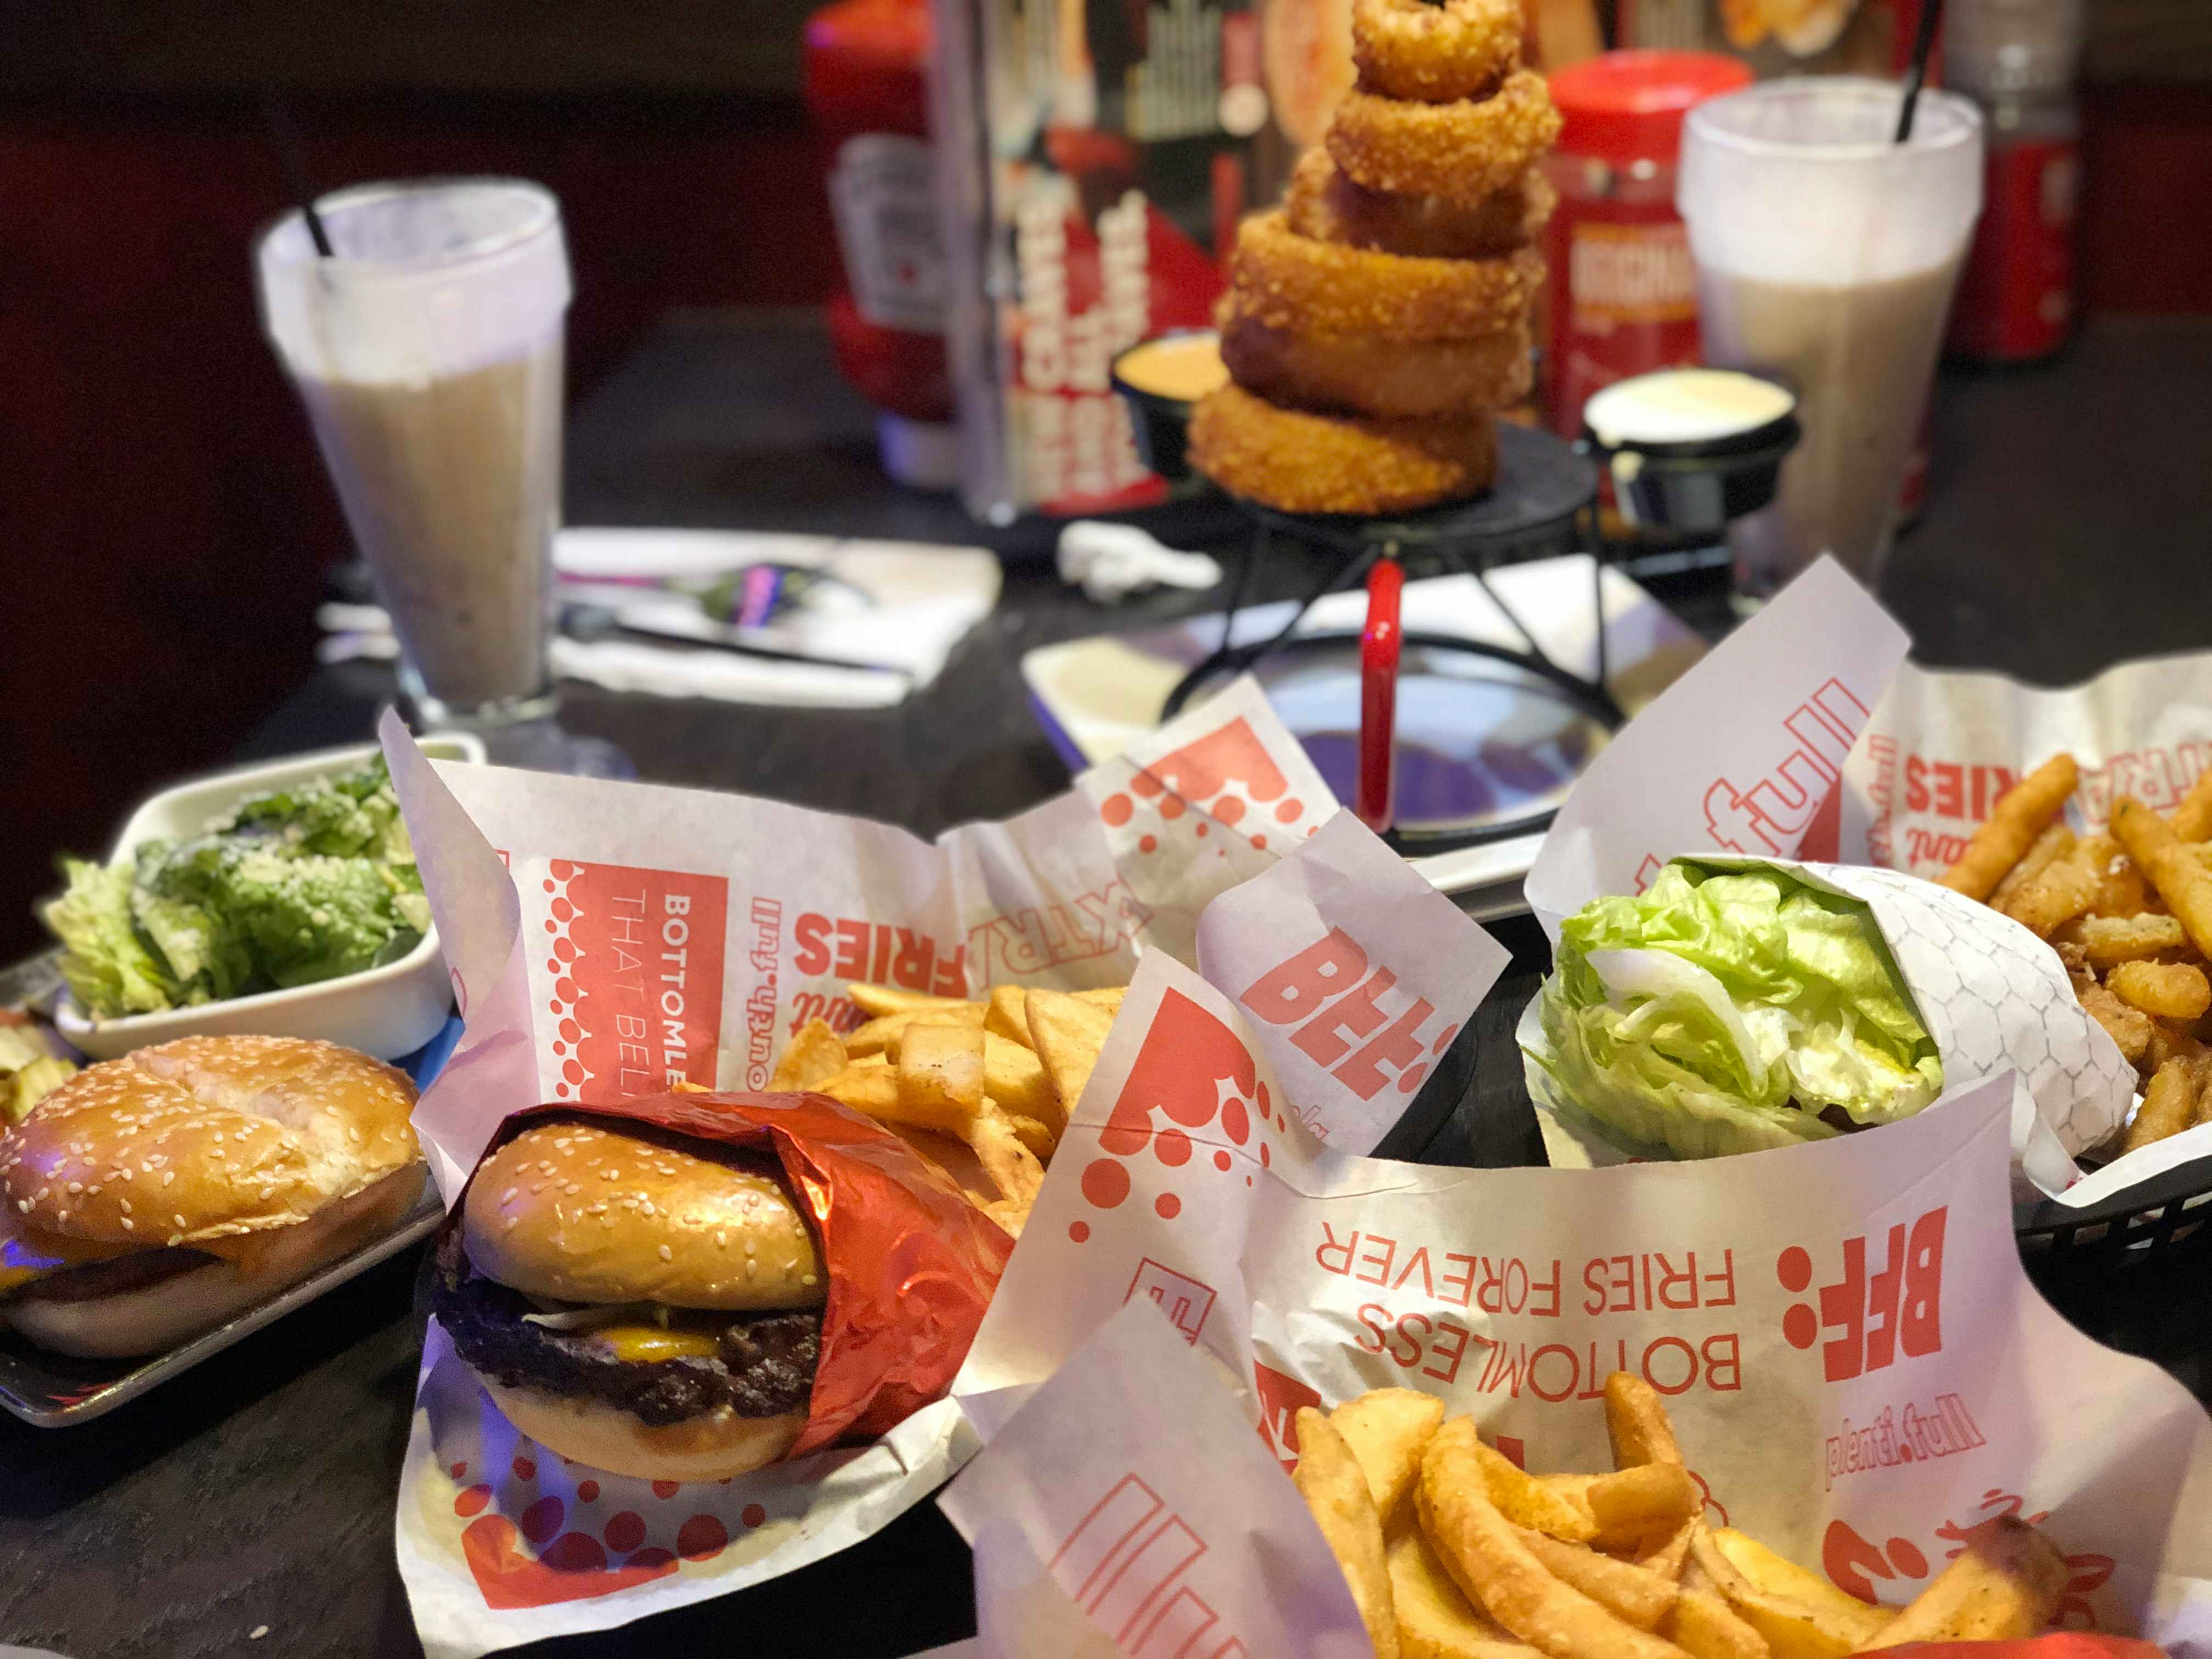 A table at Red Robin with multiple plates of food, including burgers, fries, broccoli, a tower of onion rings, and two milkshakes.